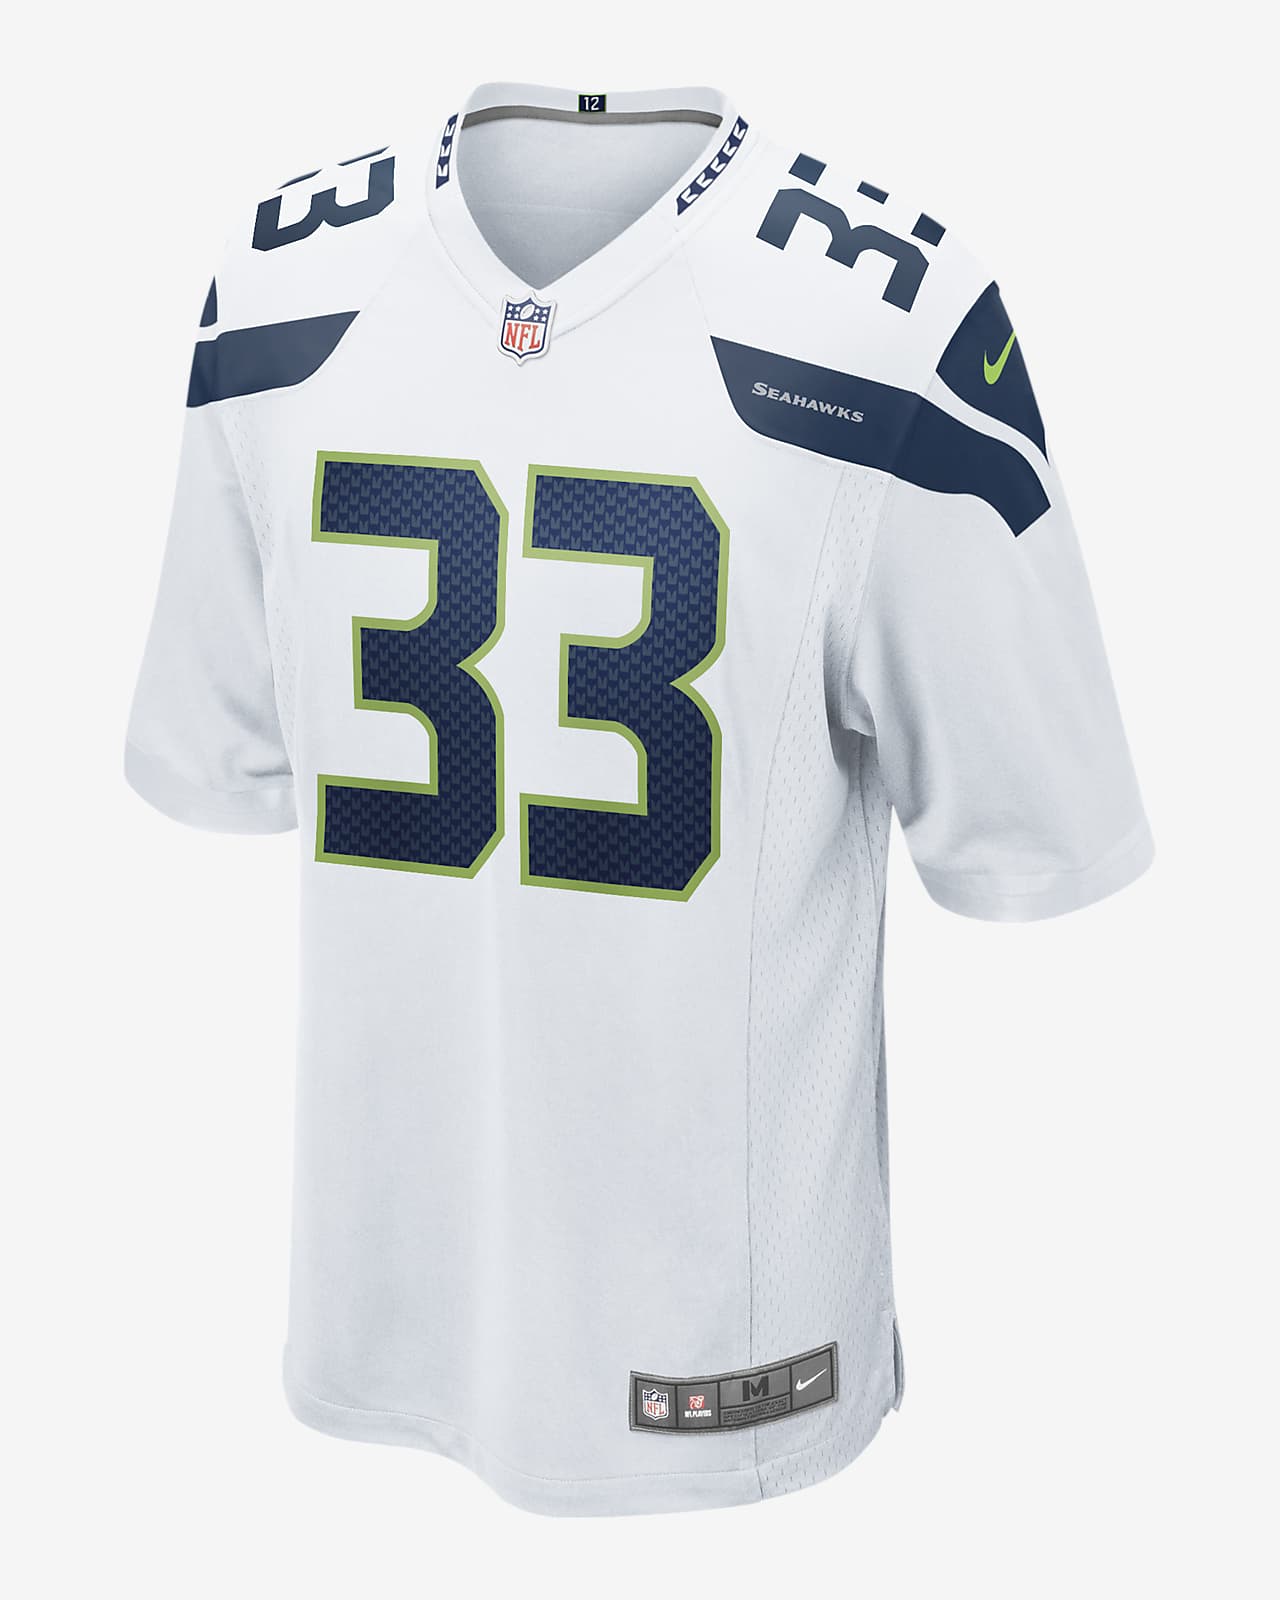 number 12 seahawks jersey